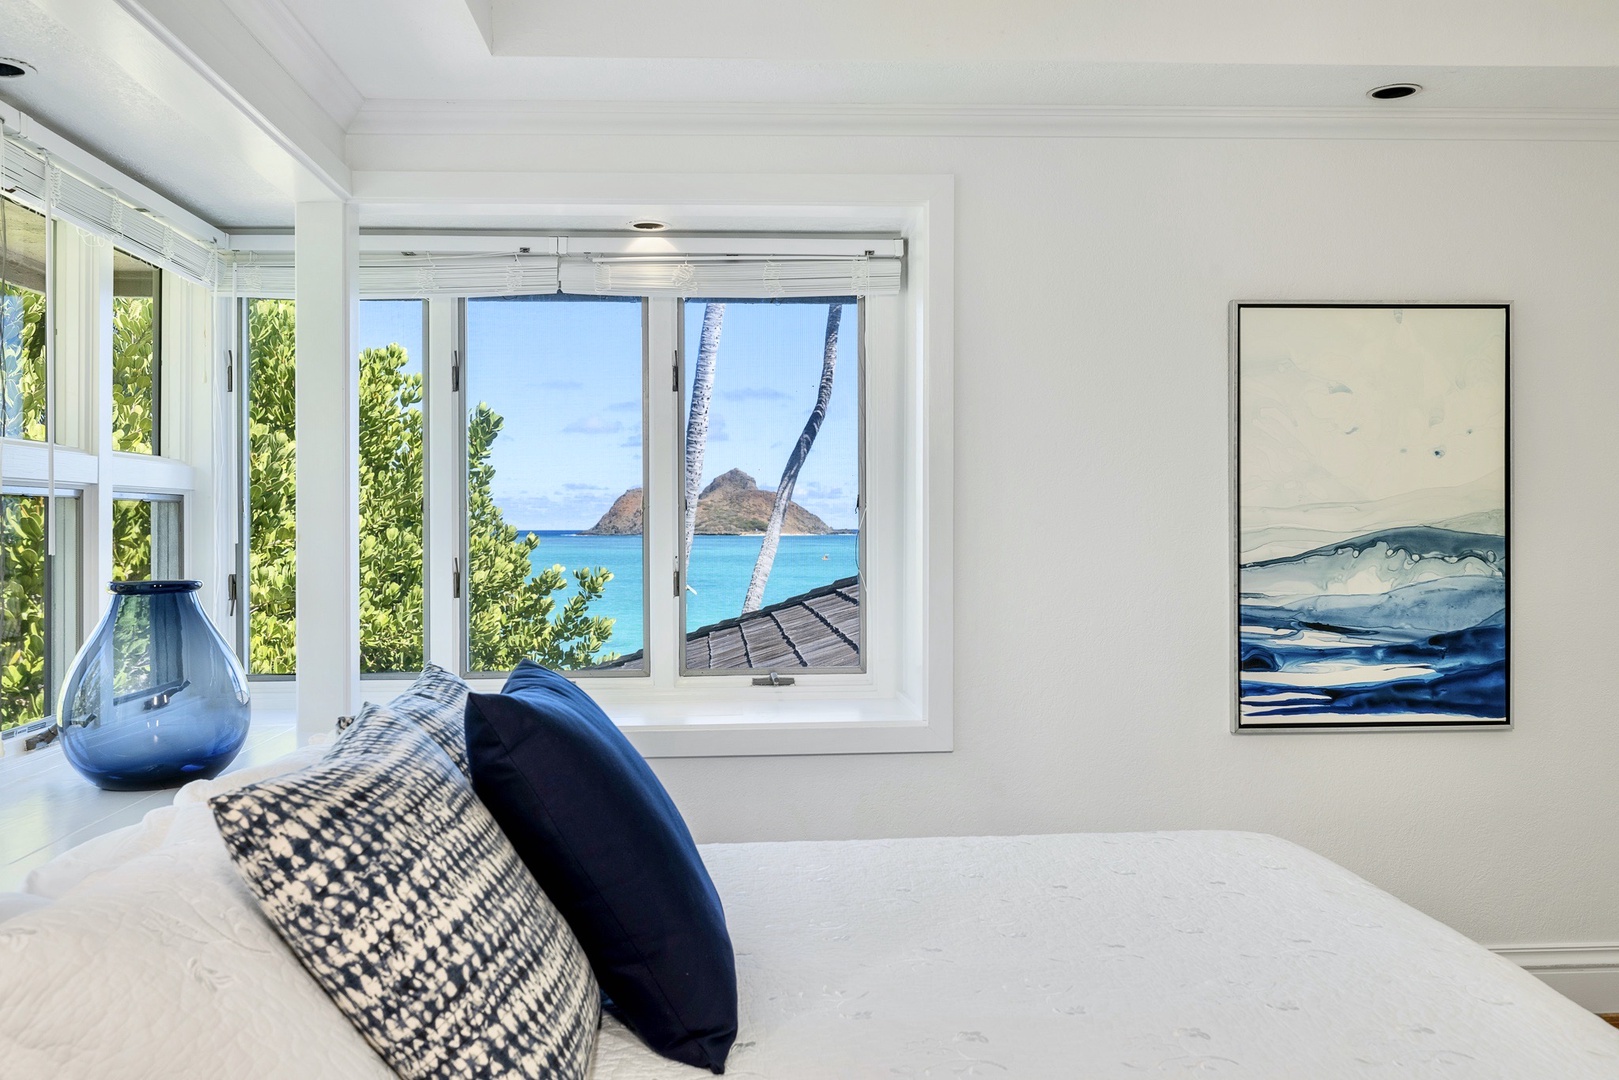 Kailua Vacation Rentals, Lanikai Seashore - Imagine waking up to these views from the comfort of your bed